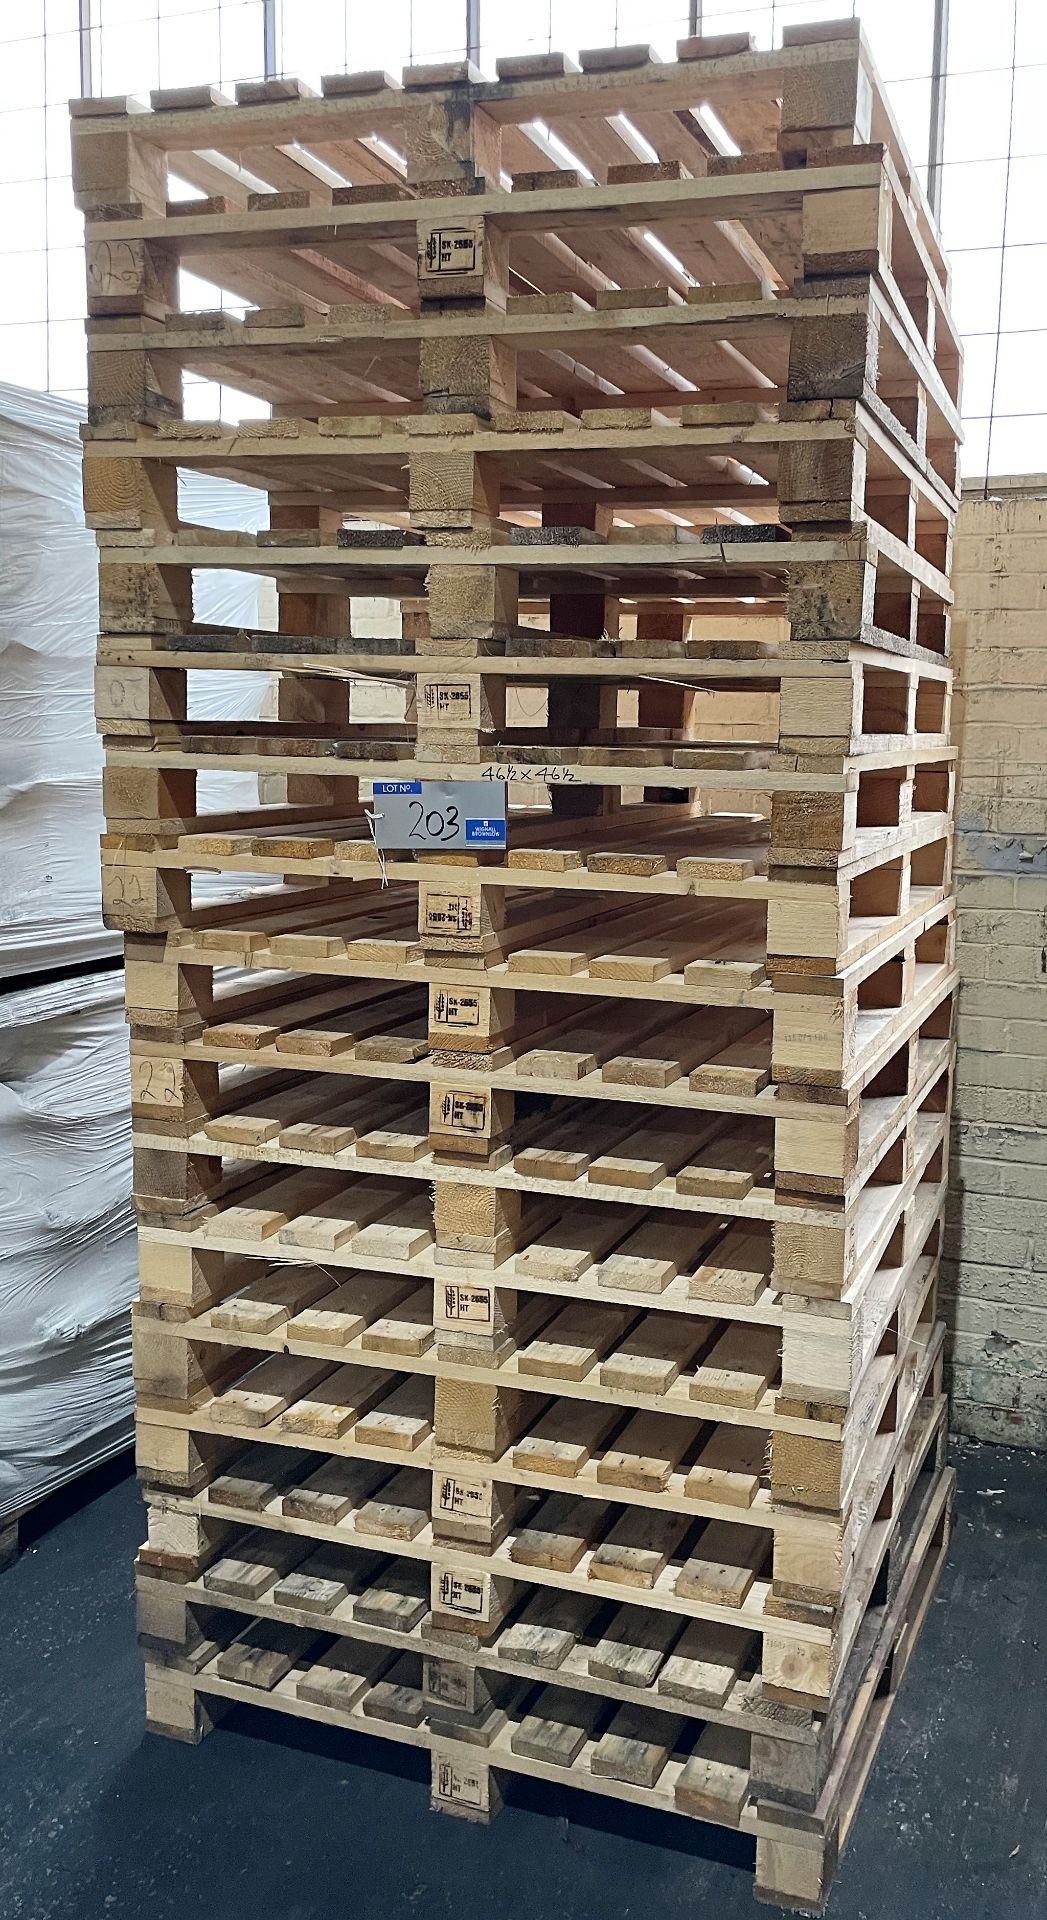 17 Timber 2 way Pallets, 46.5in x 46.5in.